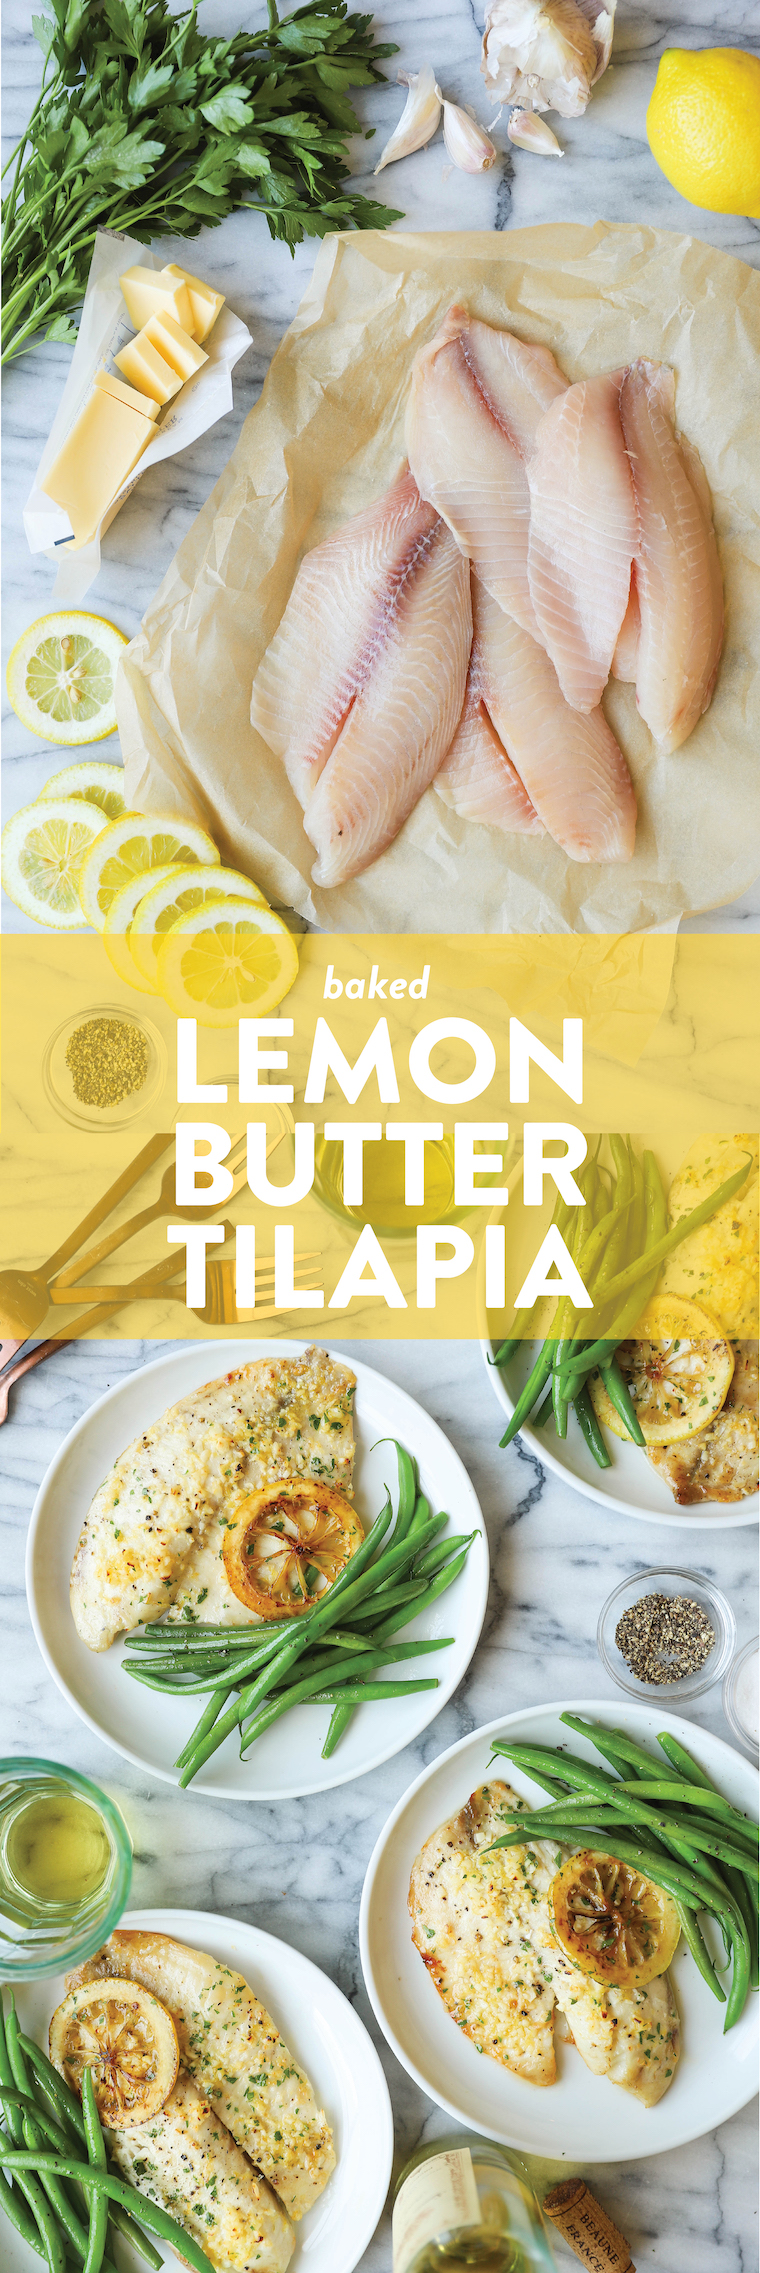 Baked Lemon Butter Tilapia - The easiest, most effortless 20 min meal ever from start to finish. And it's all made in a single pan. Win-win situation here.